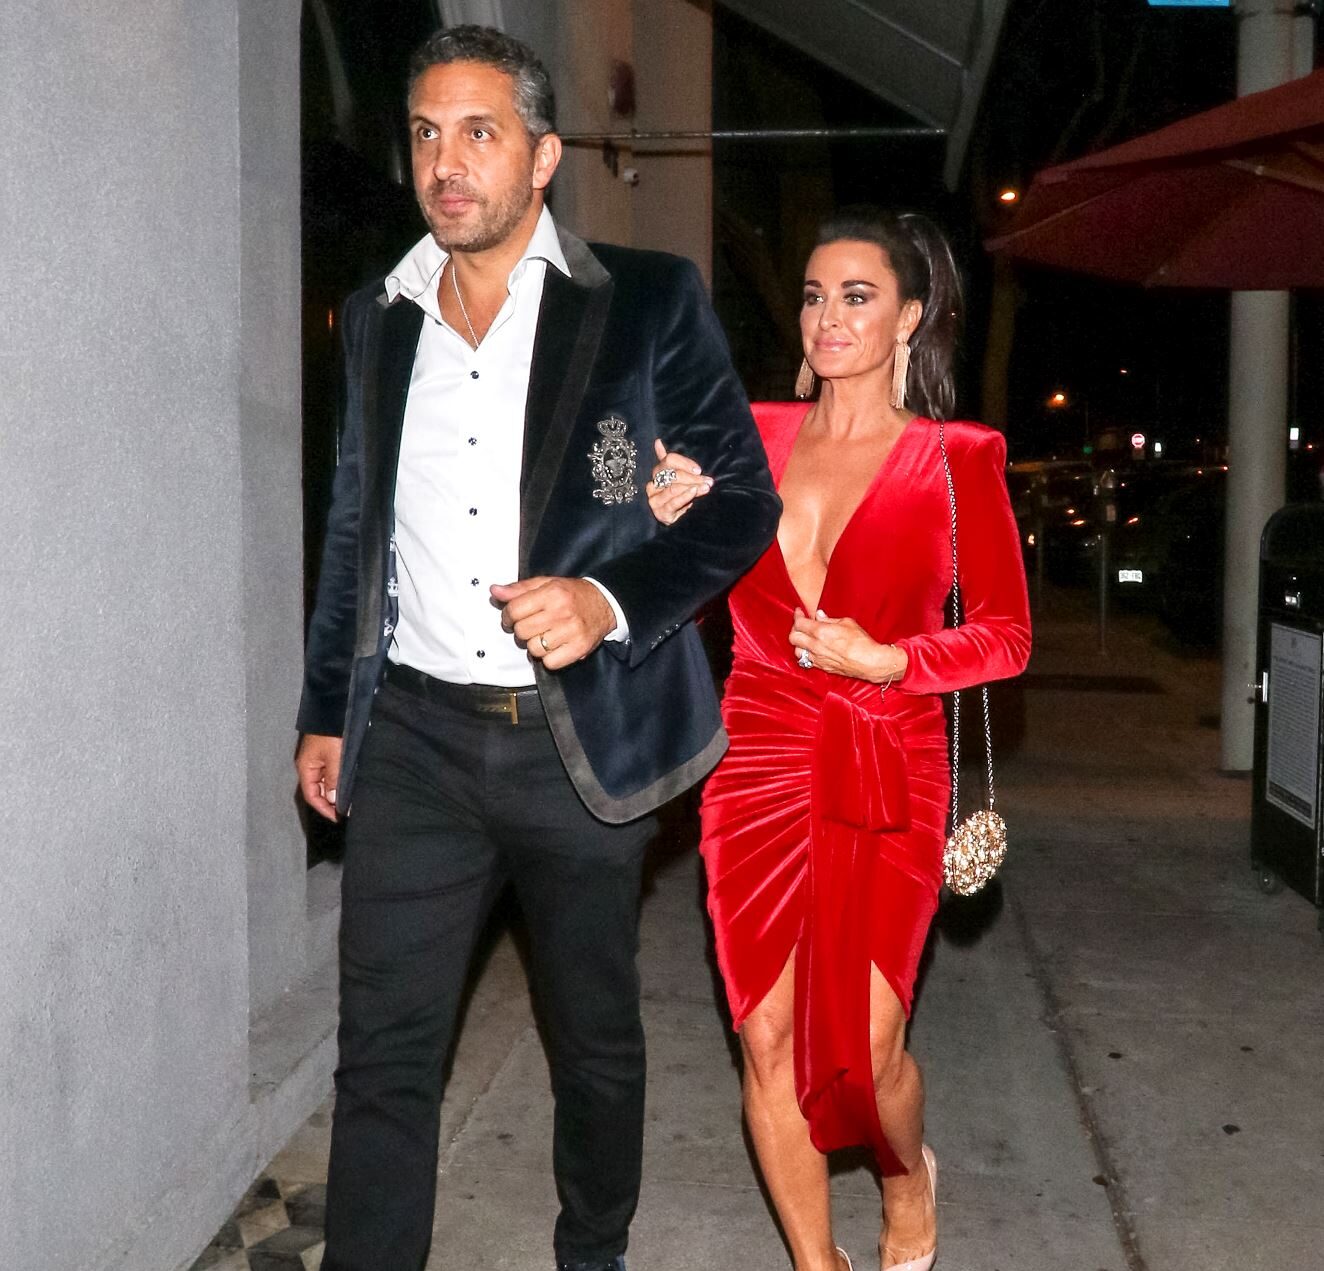 Kyle Richards Shares If She’s Returning to RHOBH, Status With Mauricio & Their Living Situation, Plus Update on Relationship With Kathy Hilton as She Steps Out With Morgan Wade in New Pic